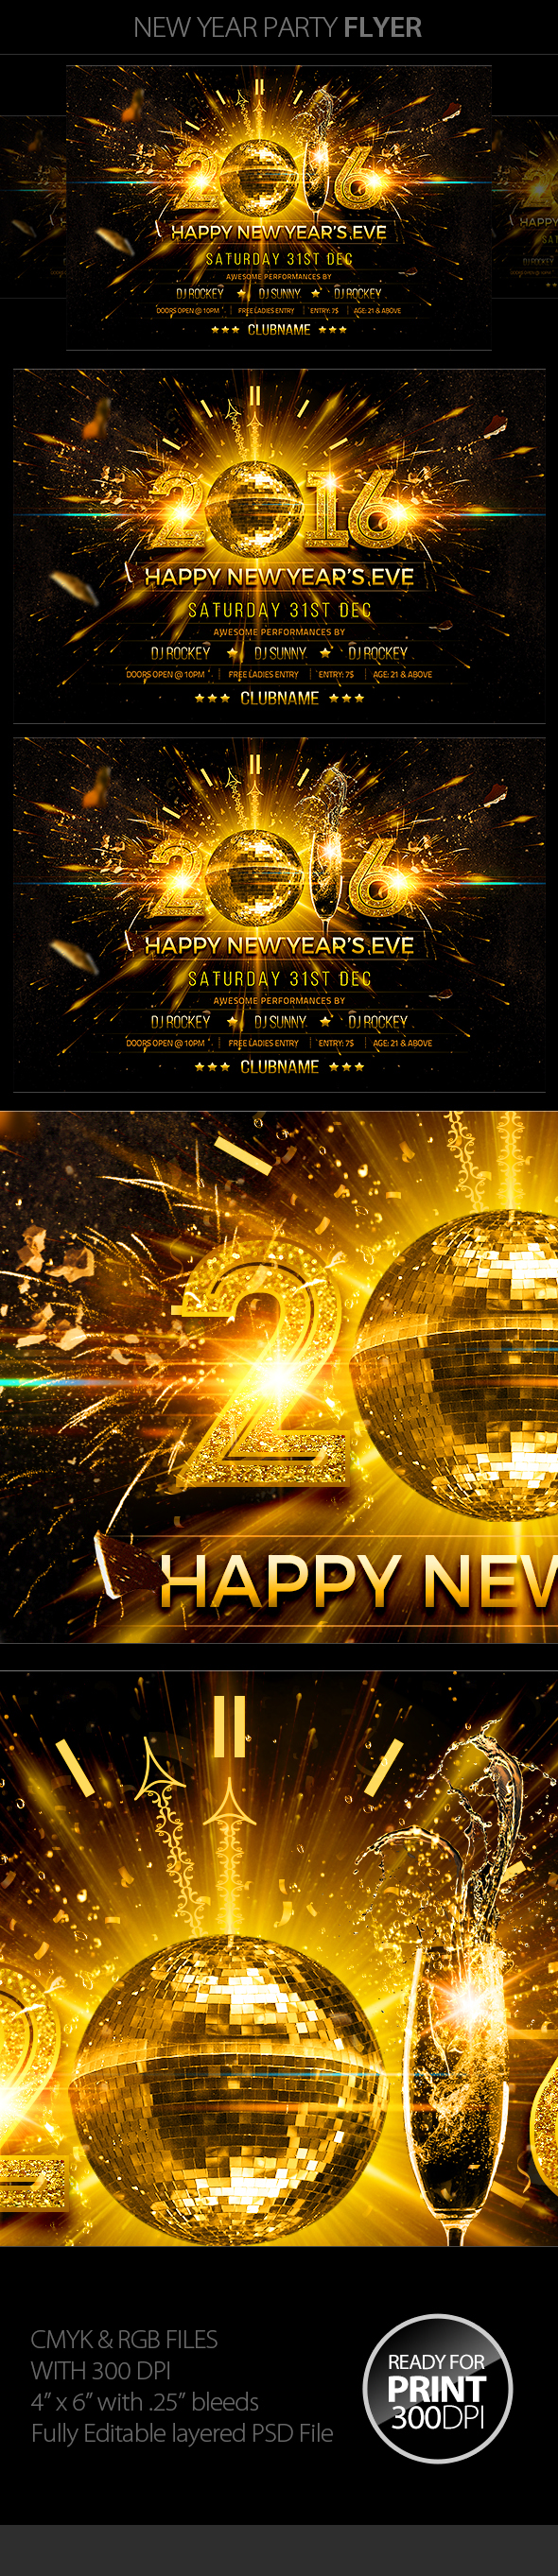 2016 party anniversary party birthday party celebration Champagne disco flyer flyer luxury new year new year new year 2016 new year bash new year's Eve